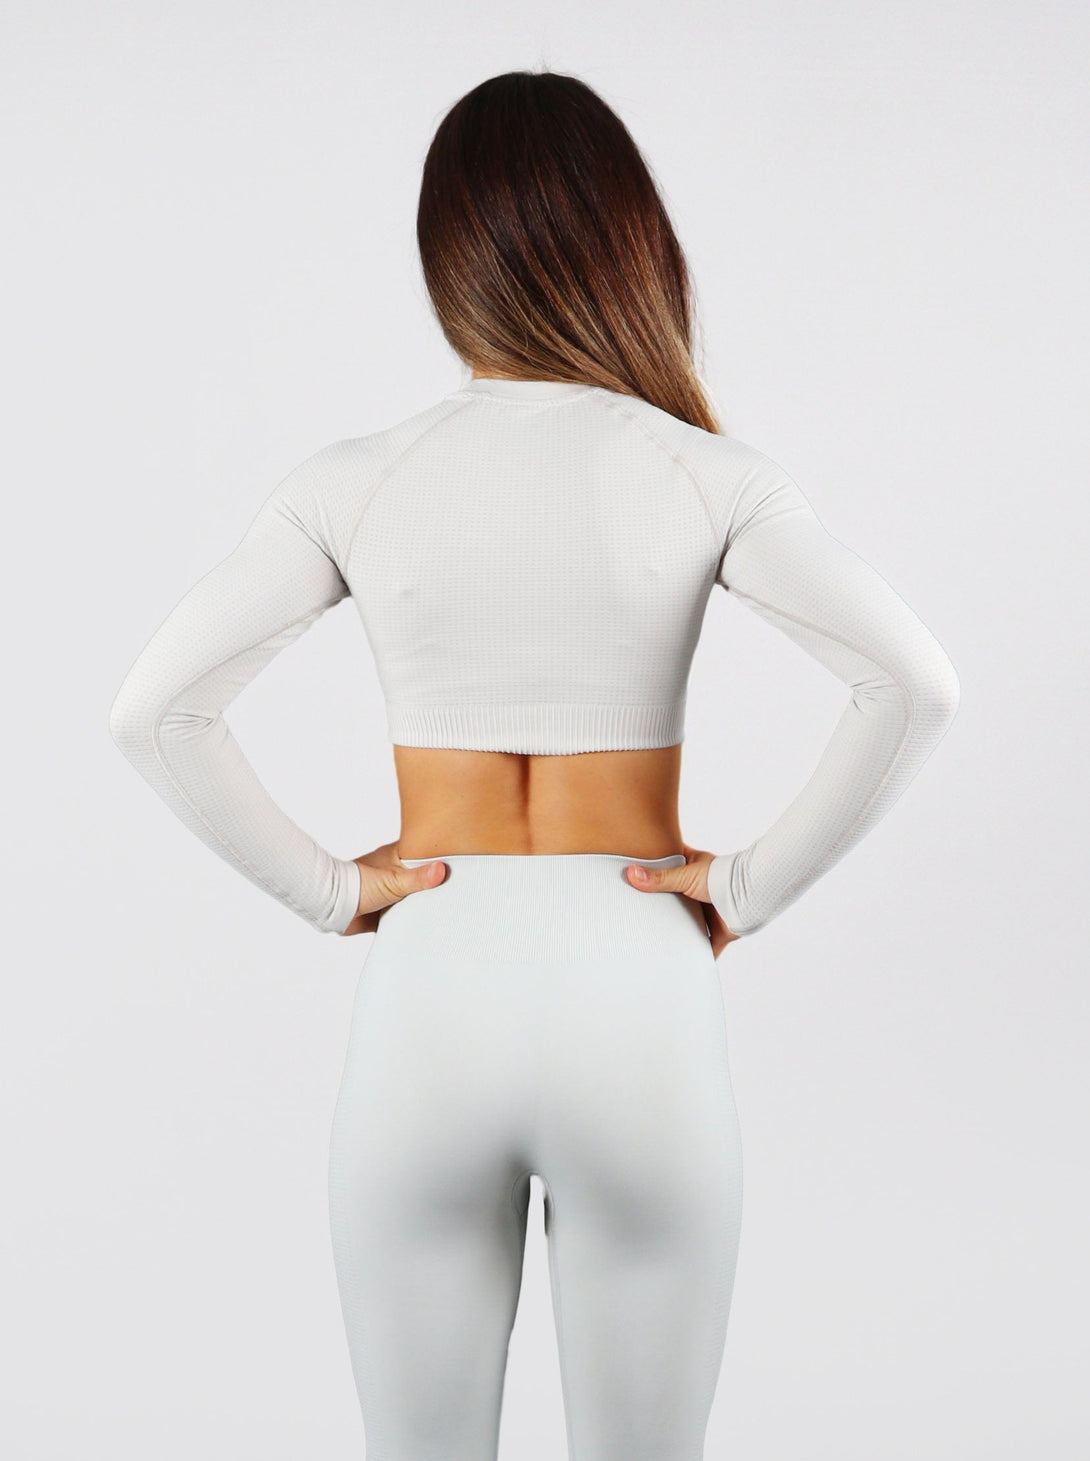 A Woman Wearing Light Grey Color The Main Long Sleeve Crop Top